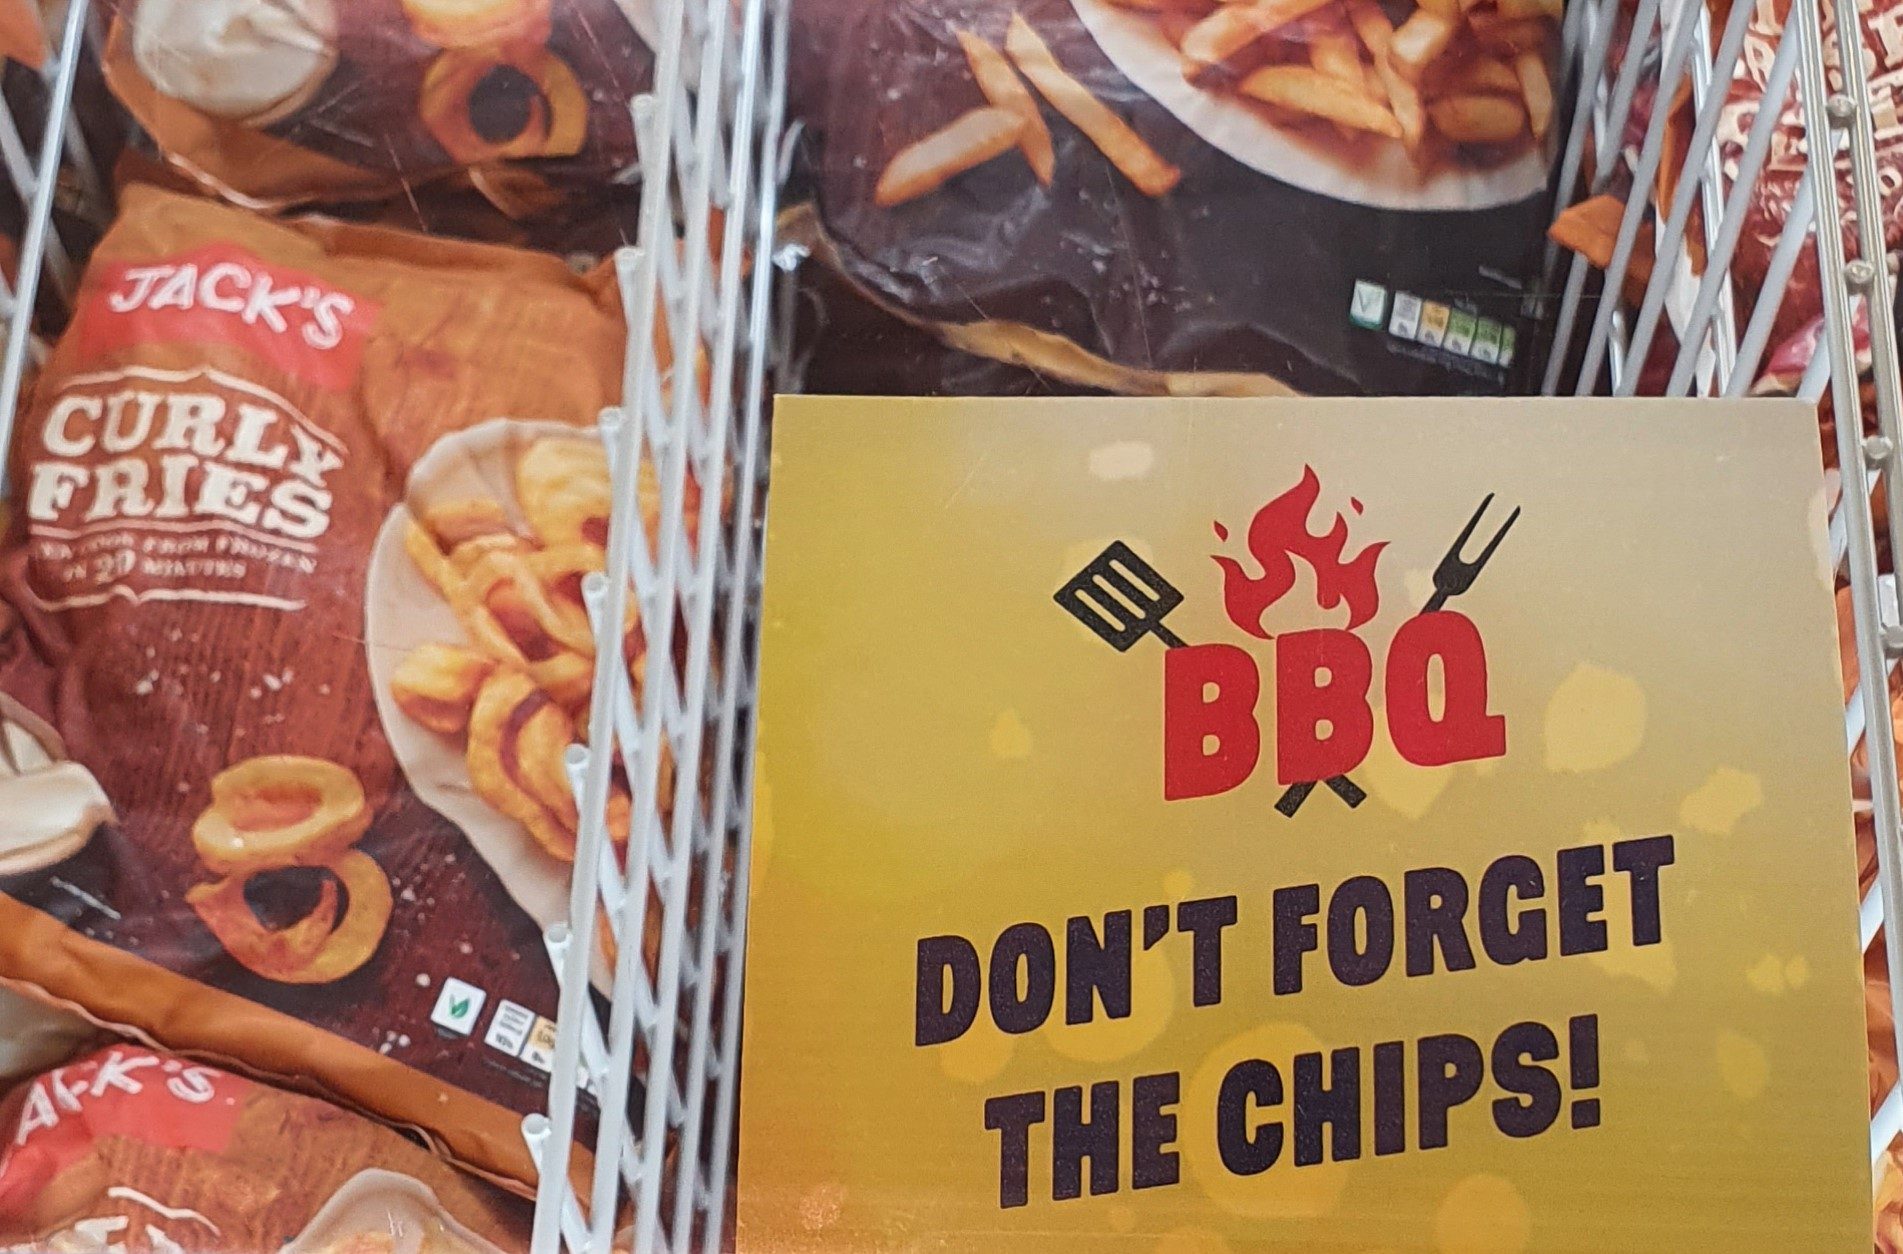 a sticker on a freezer in Jack's supermarket saying "don't forget the chips!"